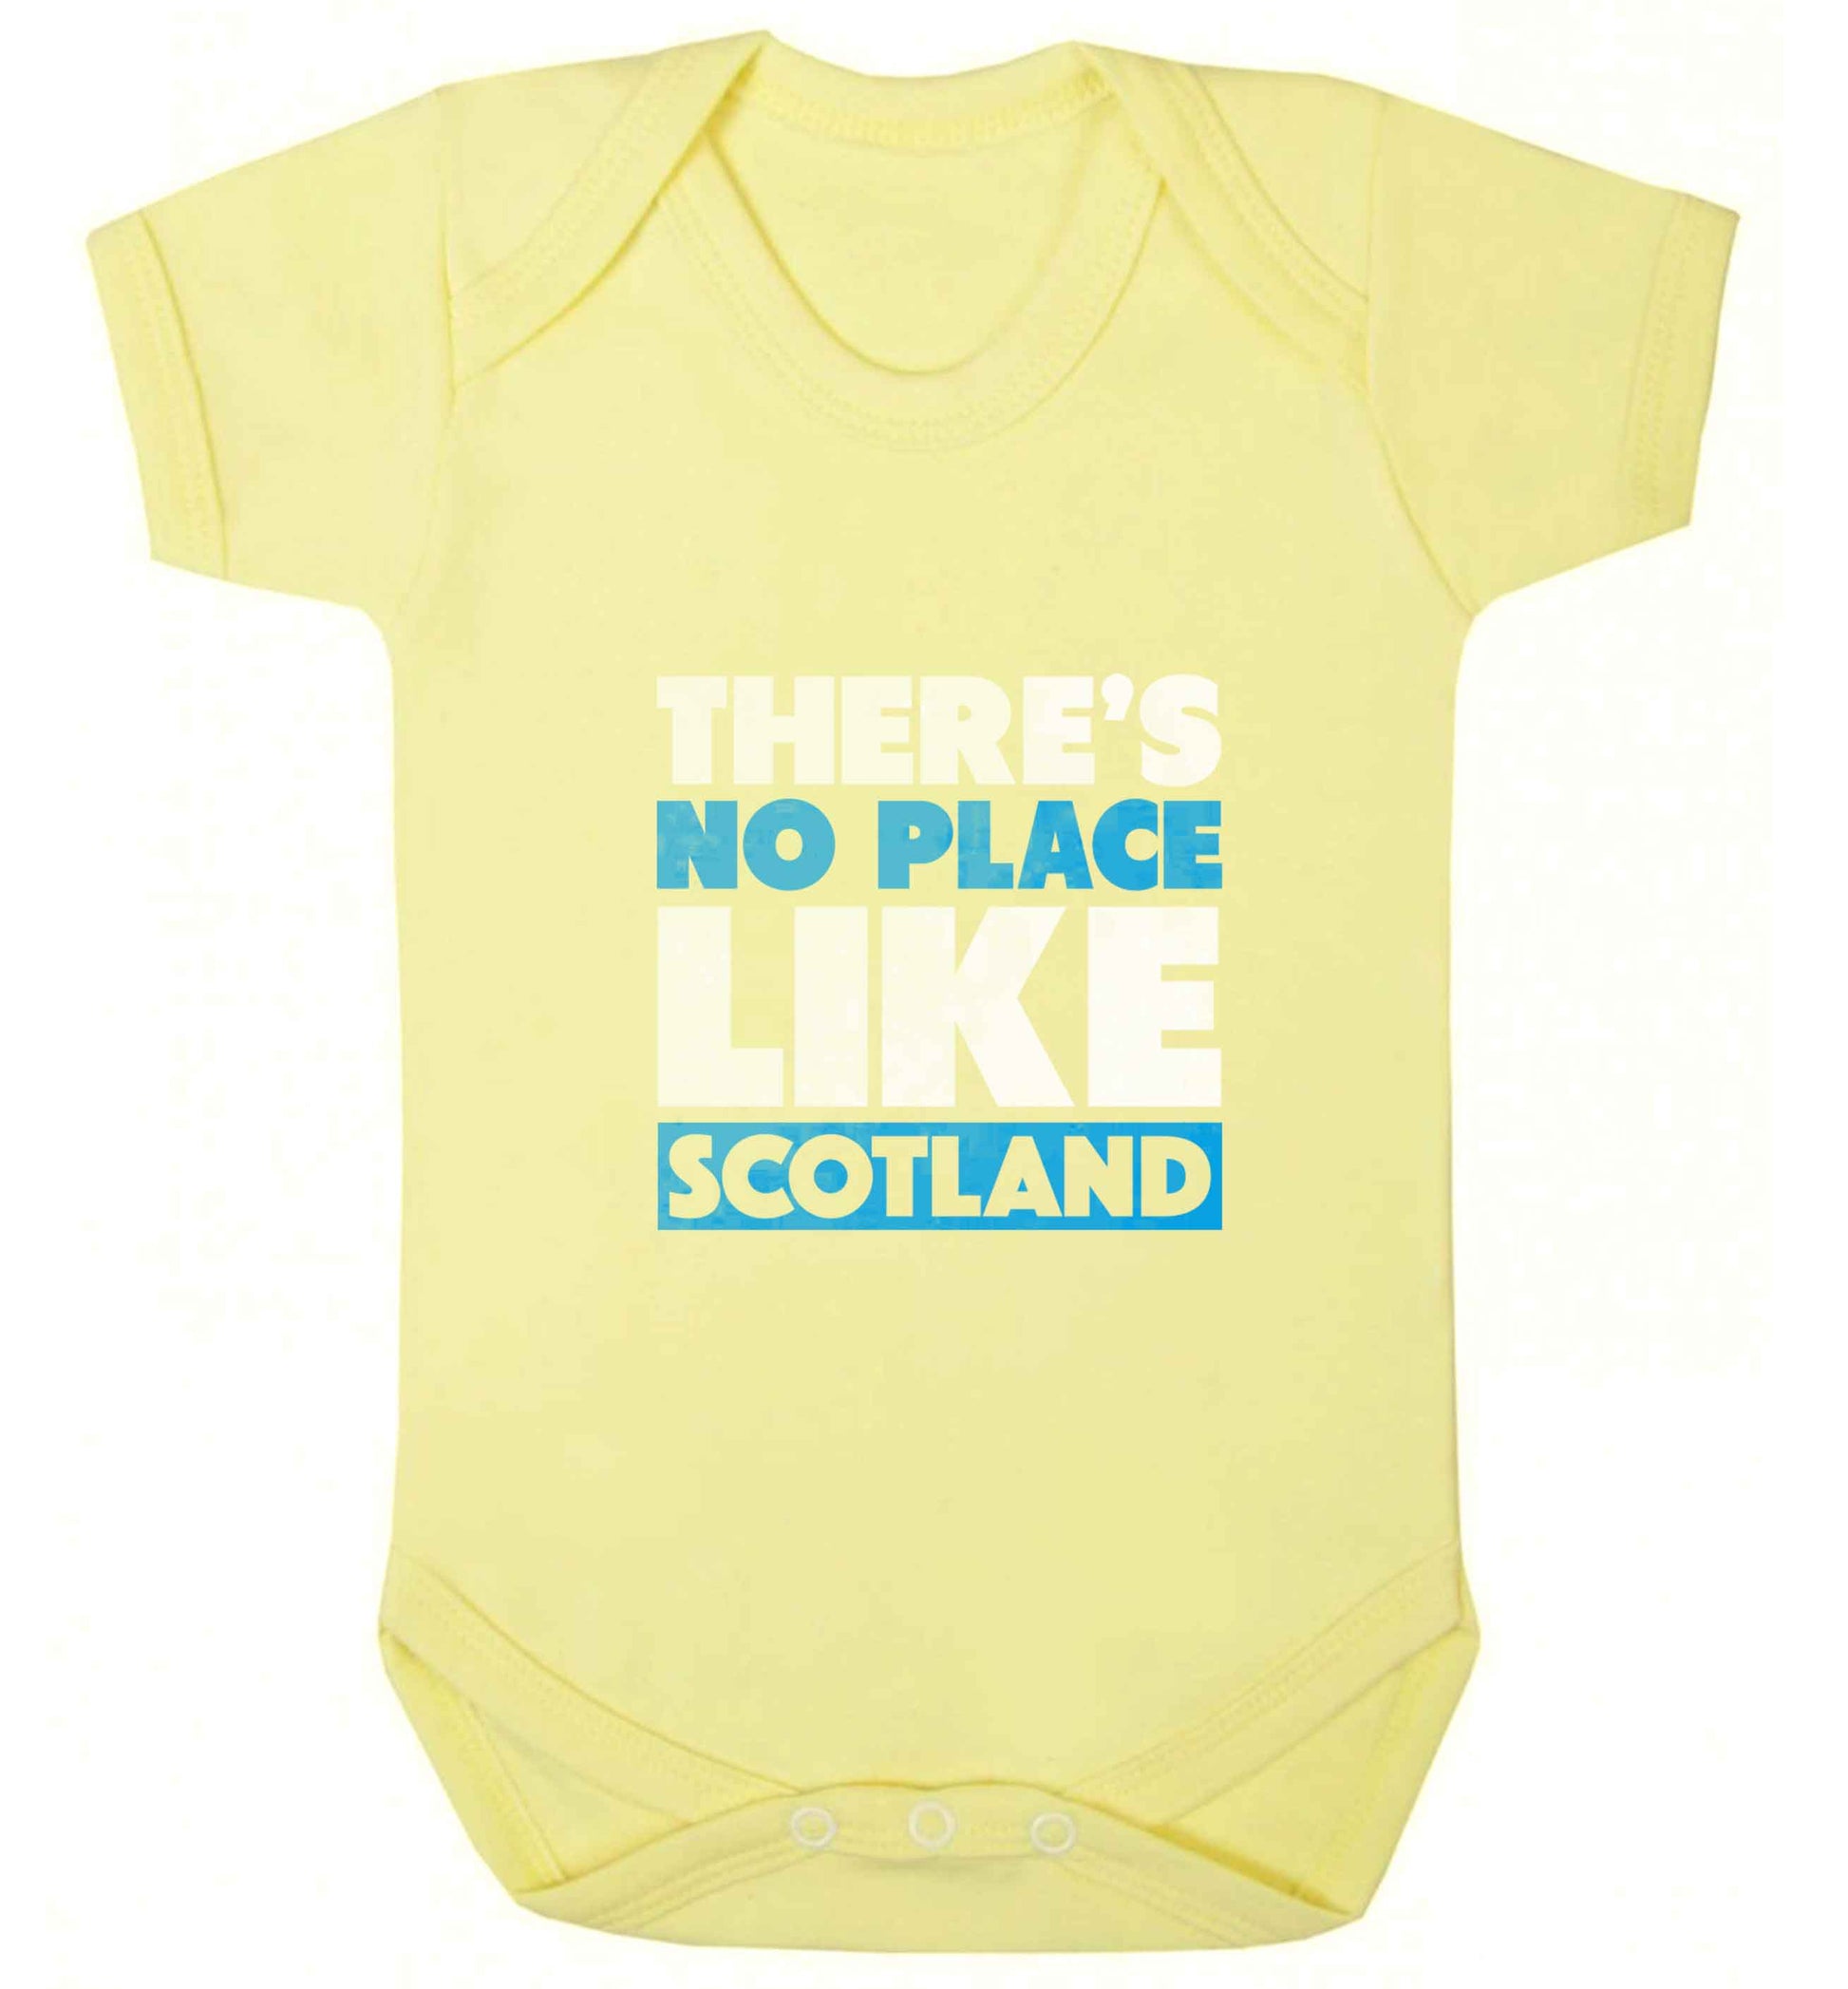 There's no place like Scotland baby vest pale yellow 18-24 months